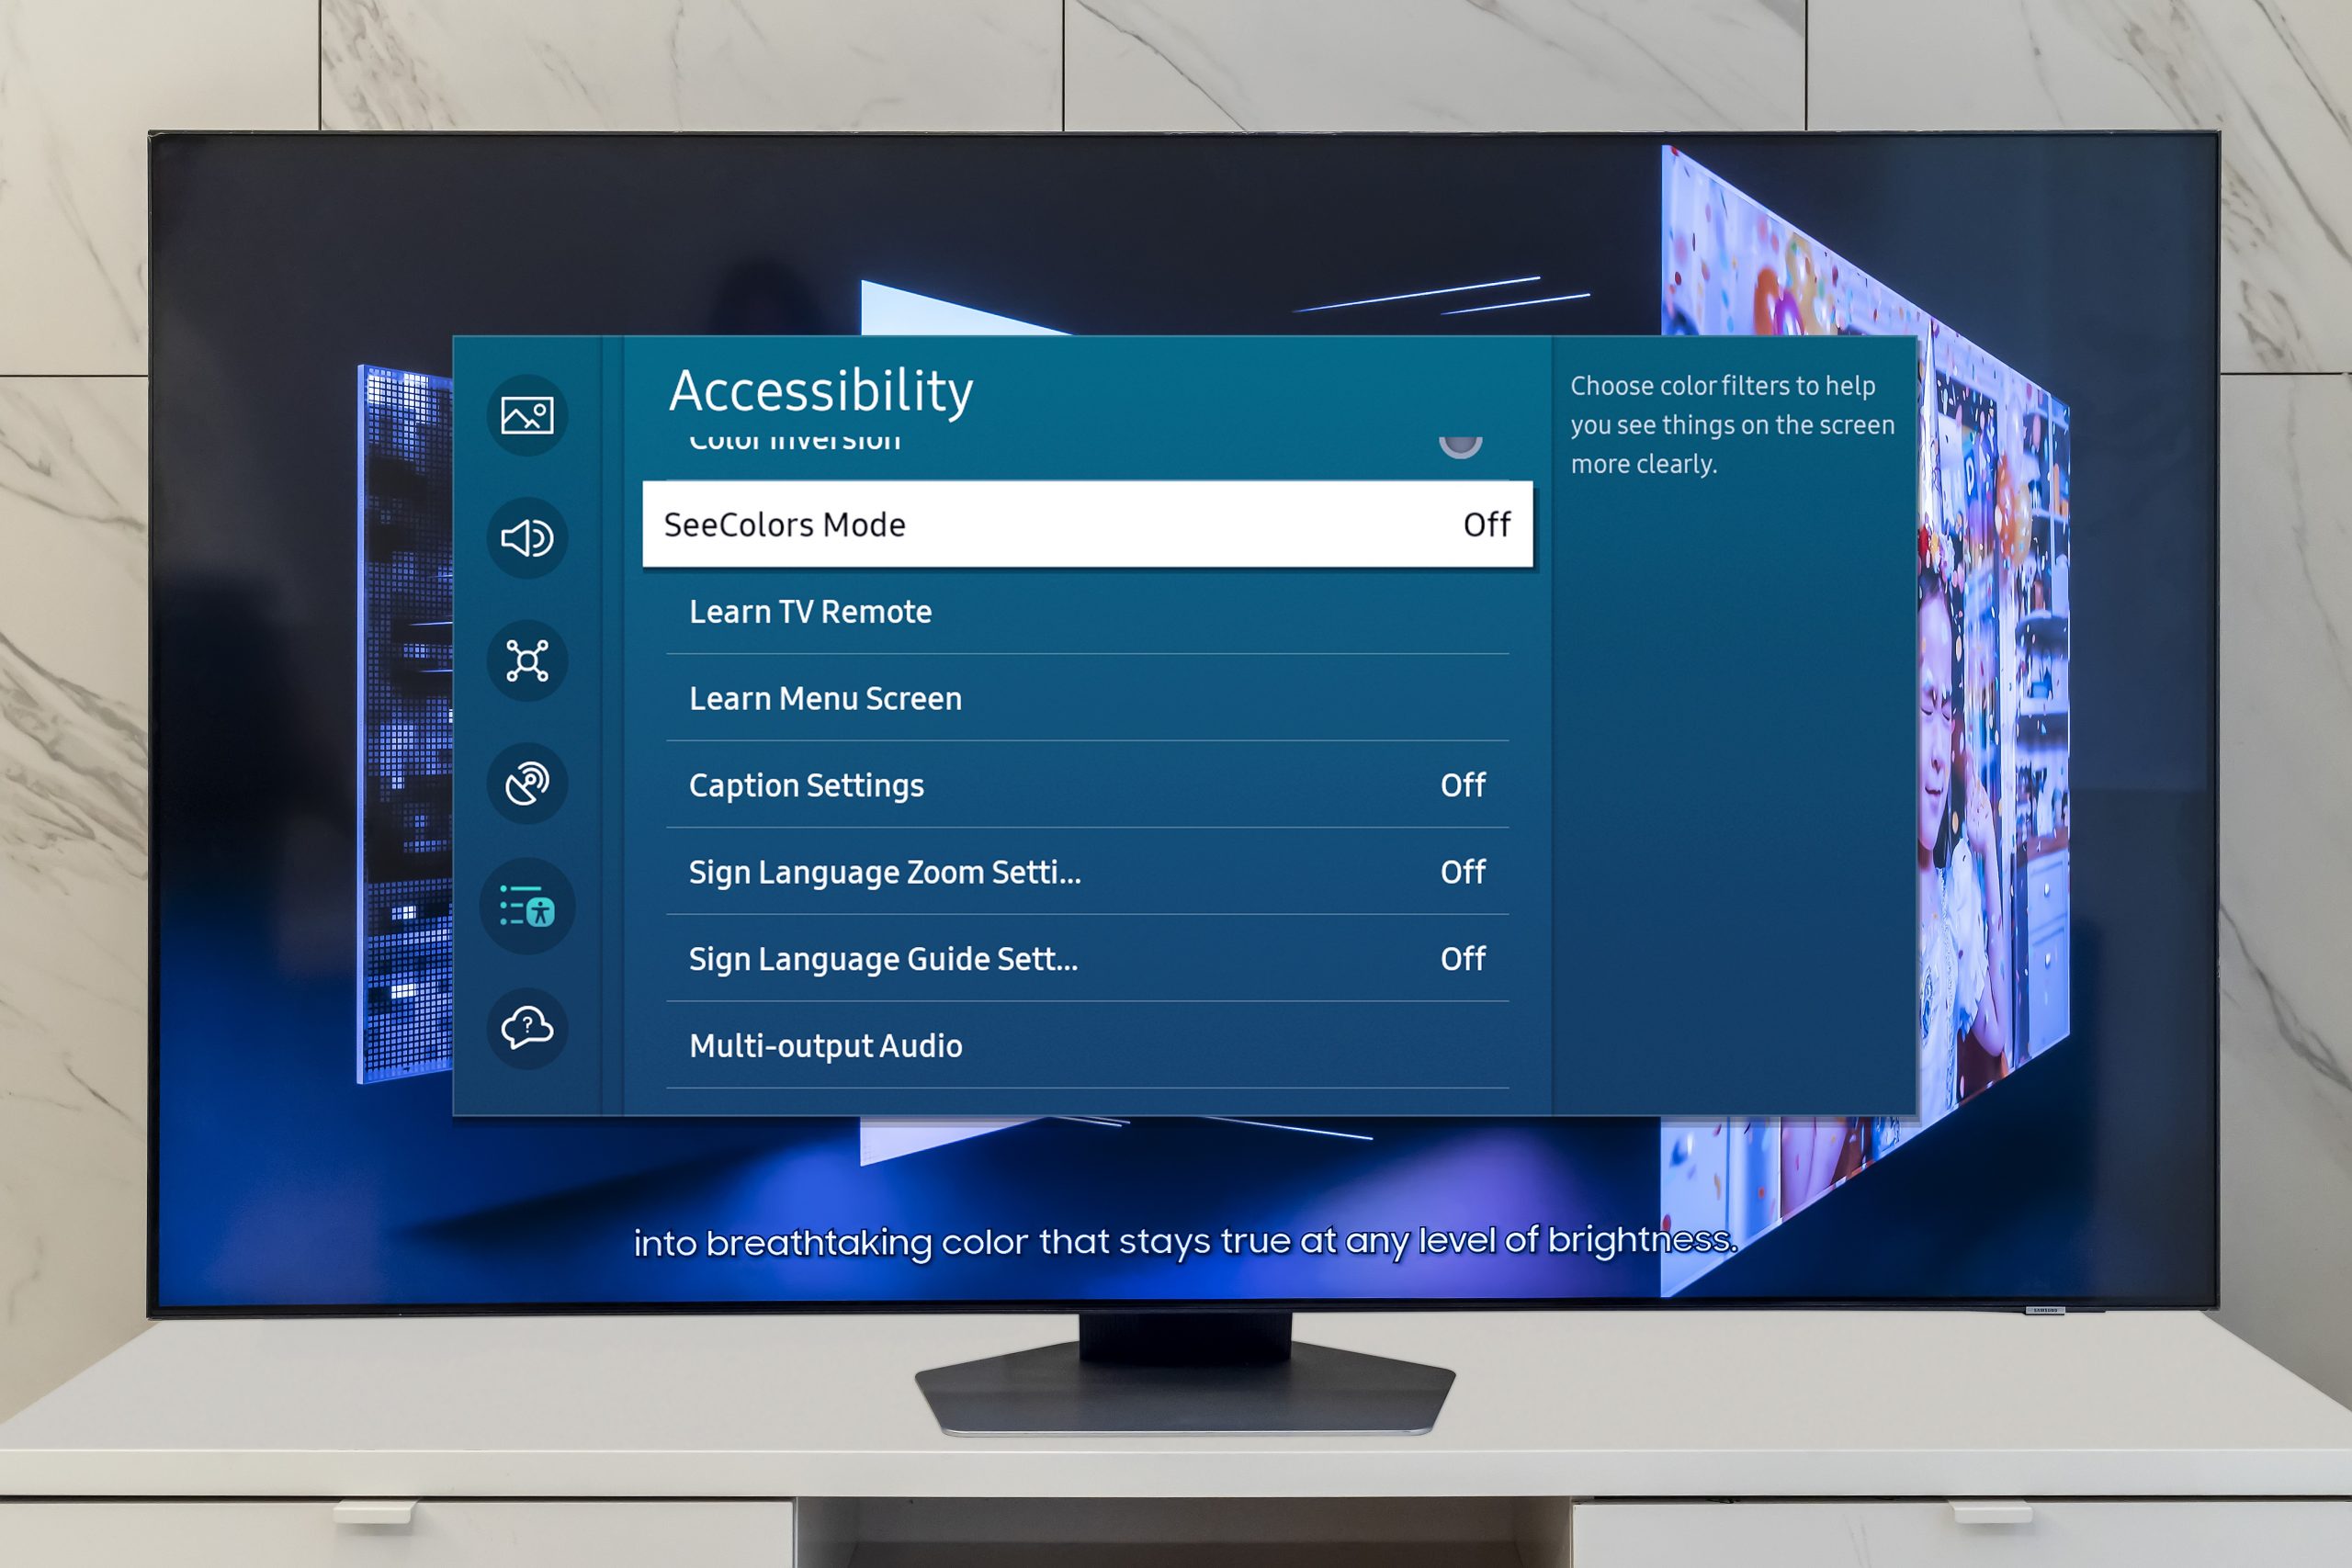 samsung-tv-monitors-seecolors-mode-accessibility